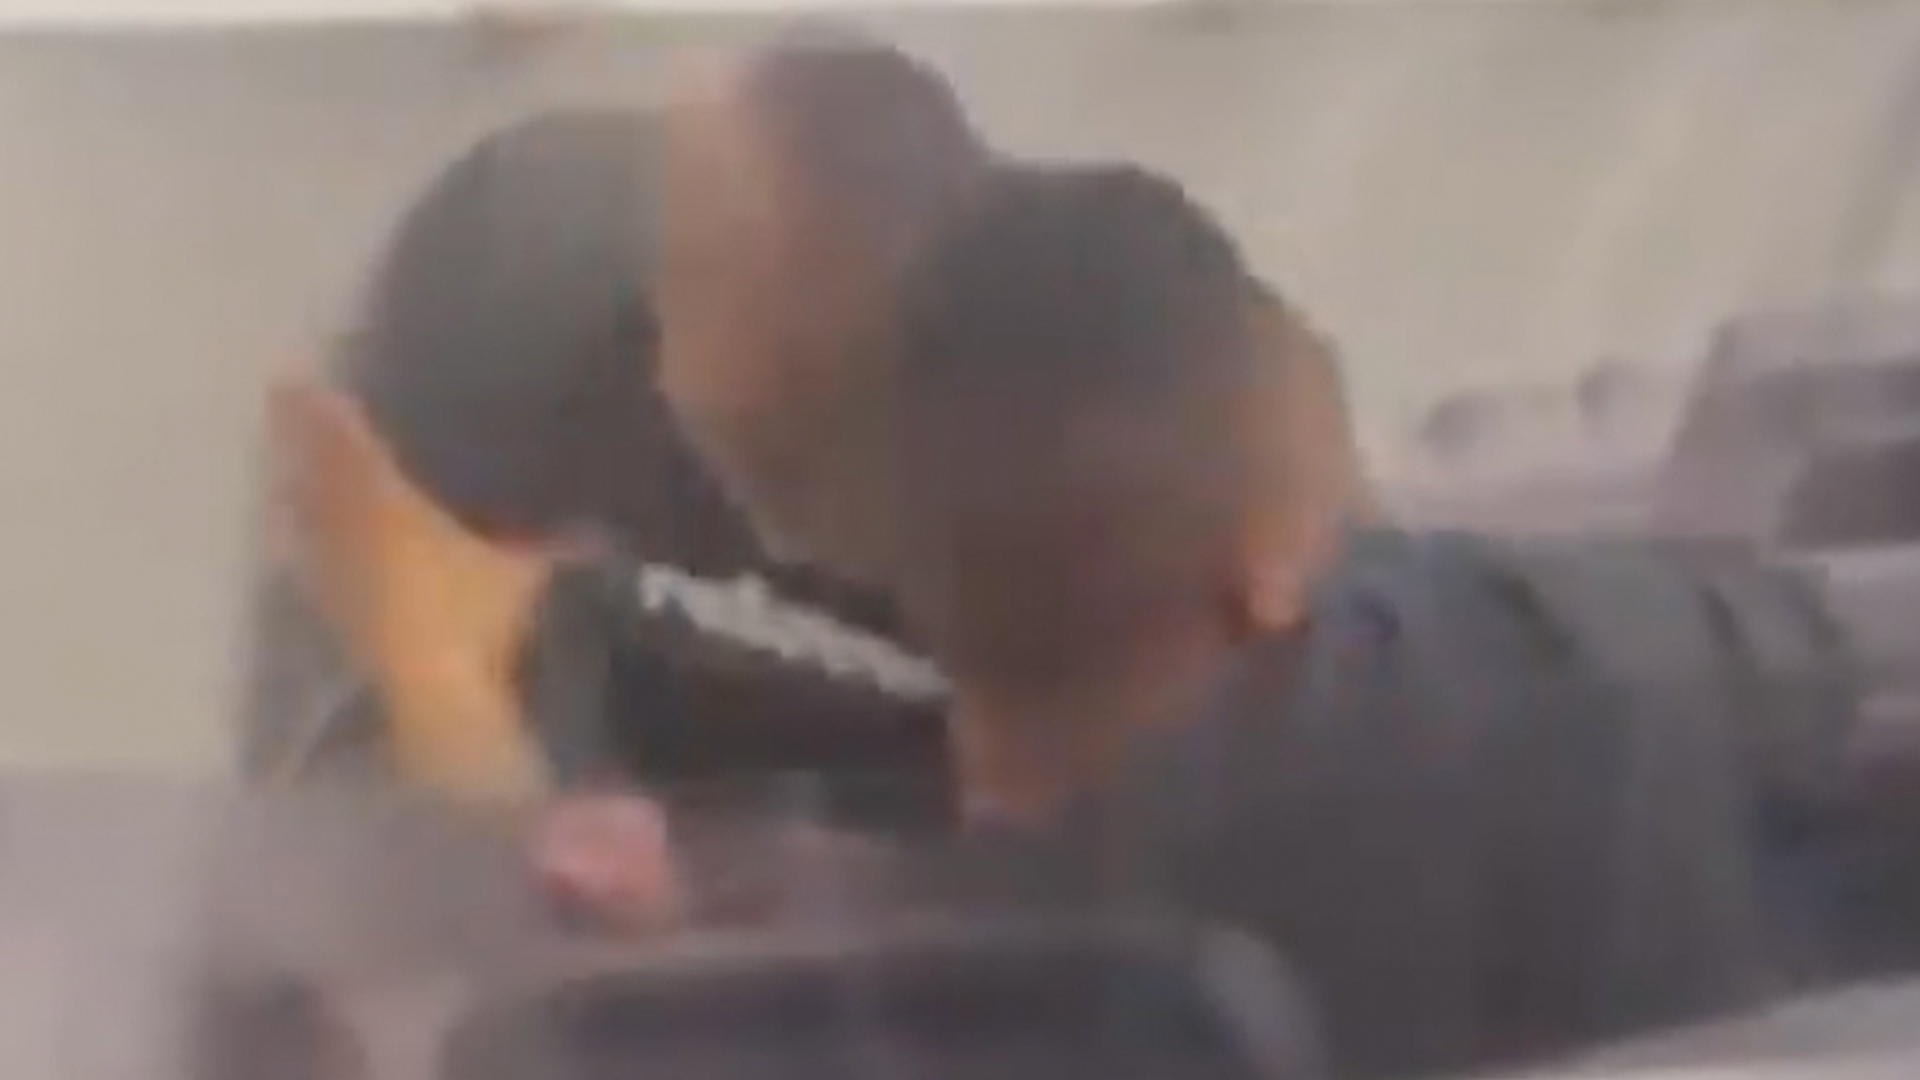 Watch shocking moment Mike Tyson repeatedly punches fellow passenger